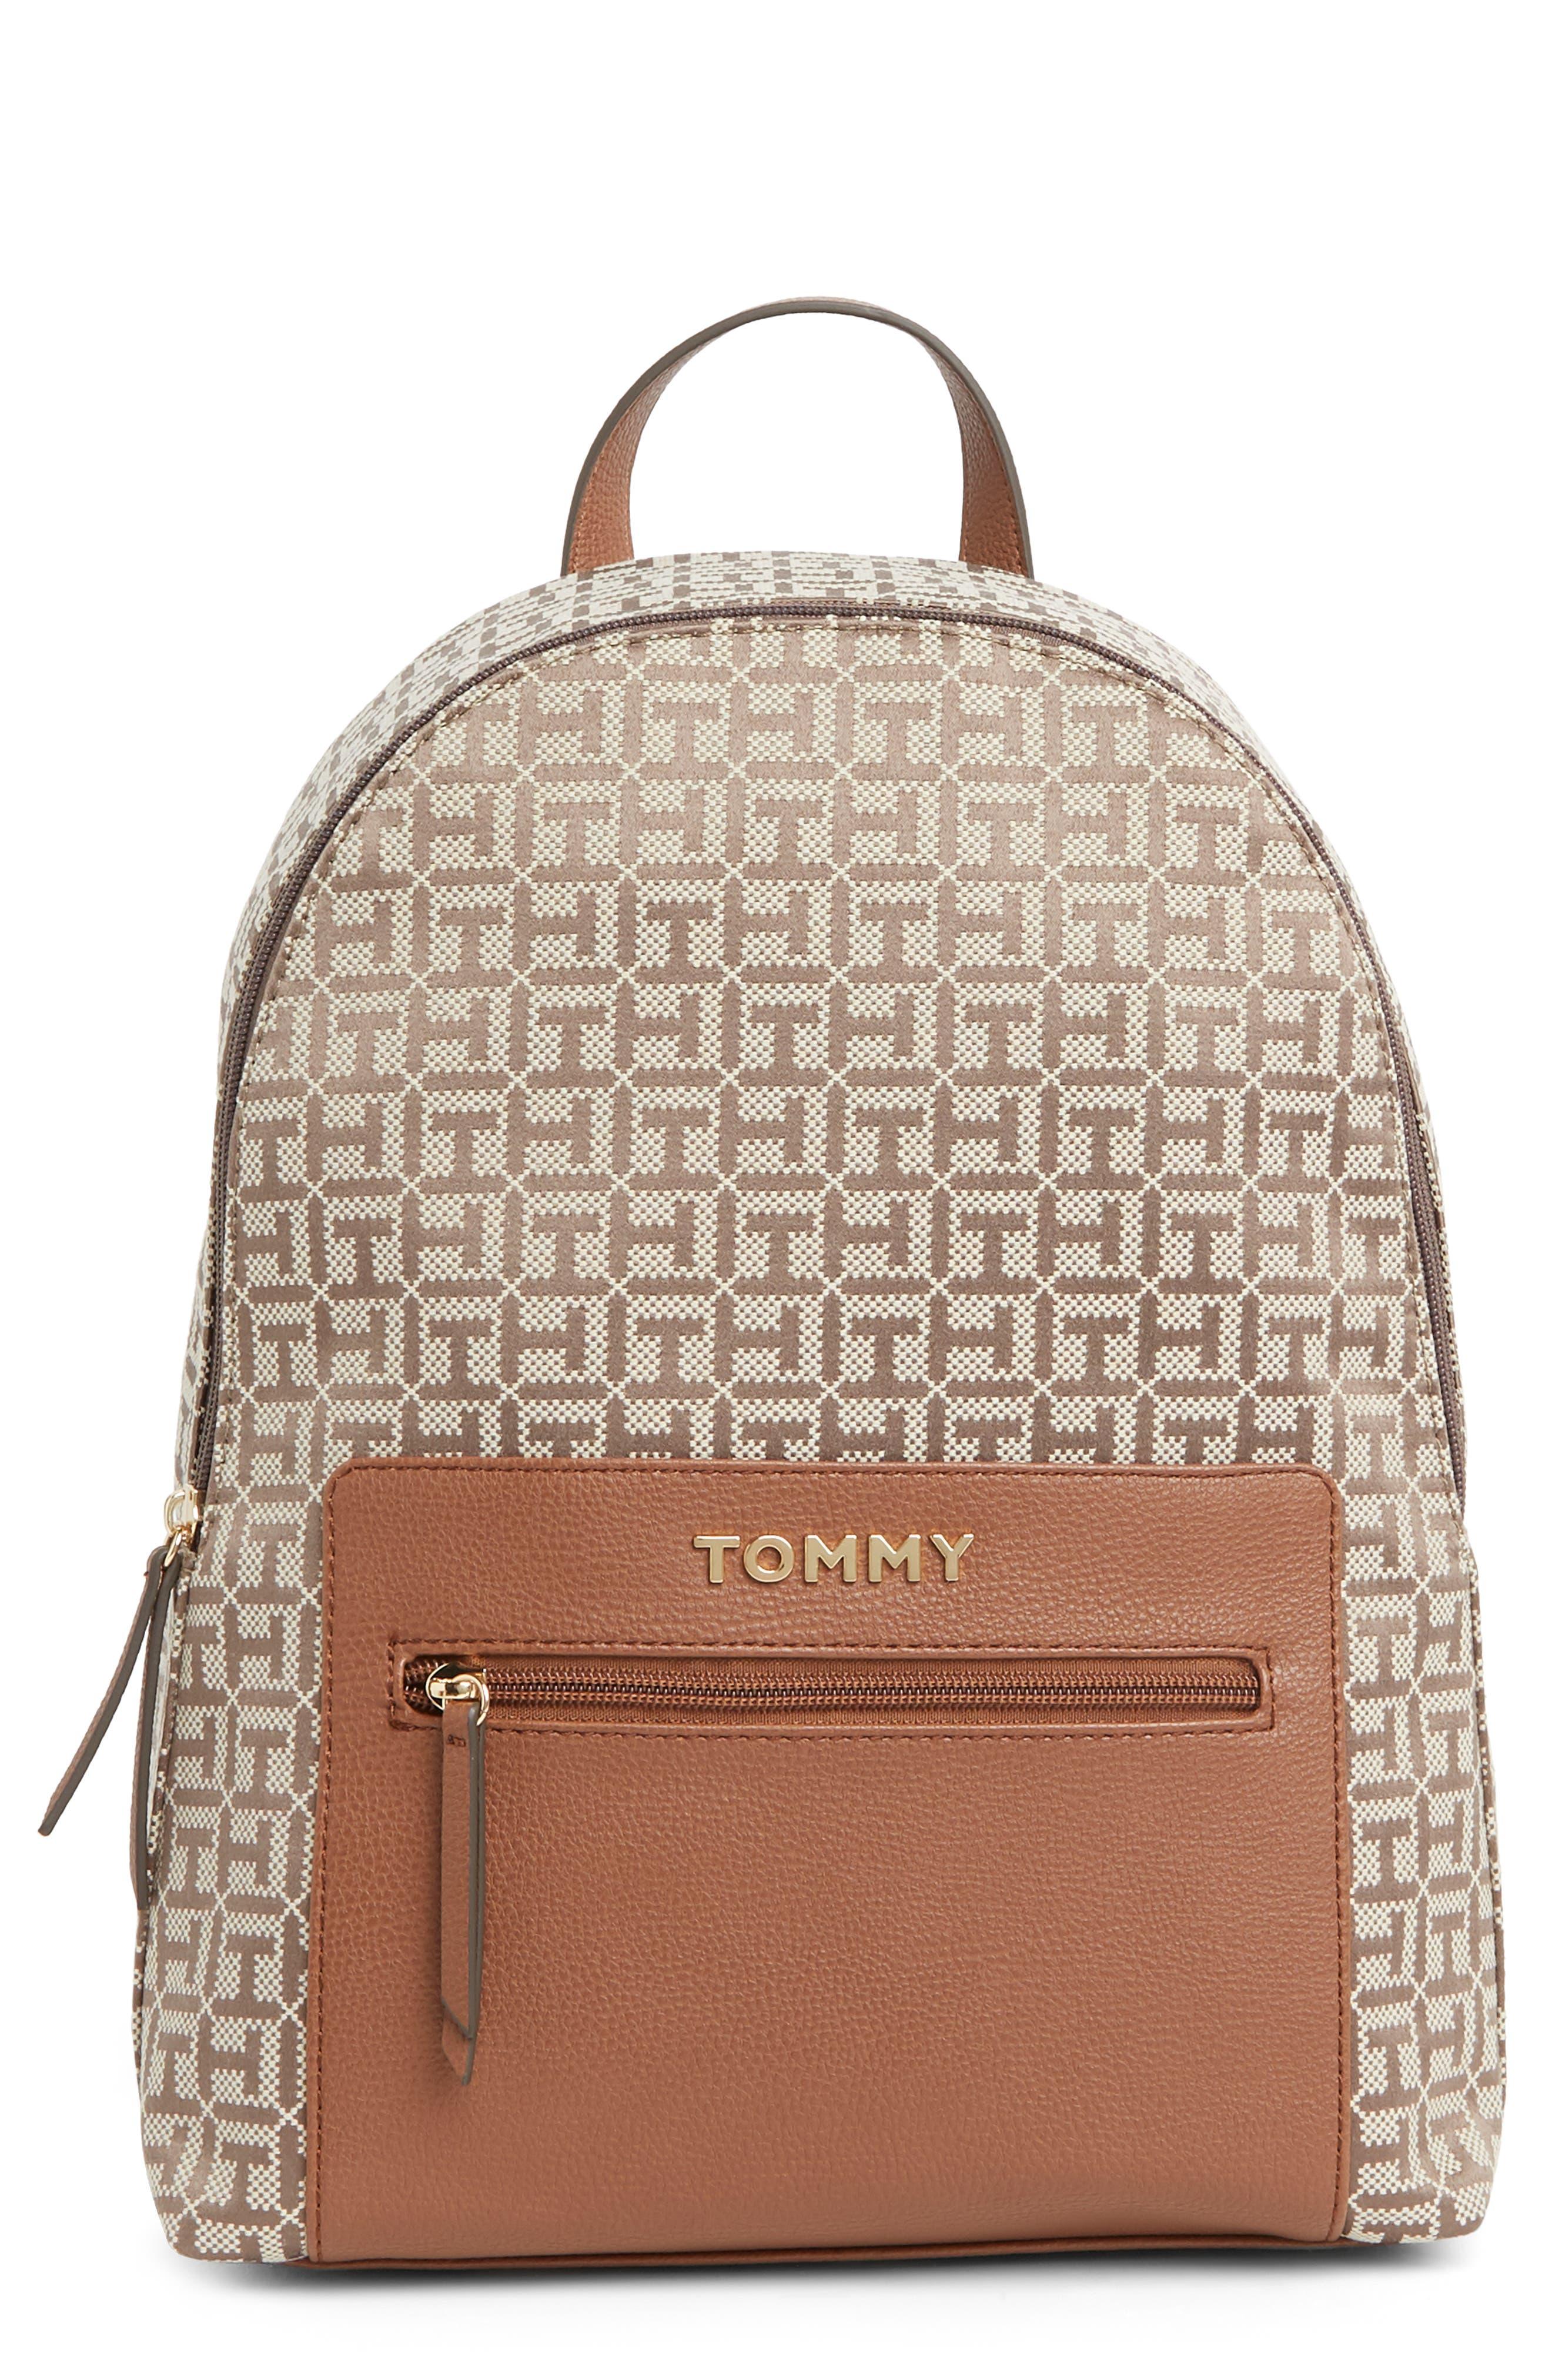 Tommy Hilfiger Alexis Ii Dome Backpack in Natural | Lyst